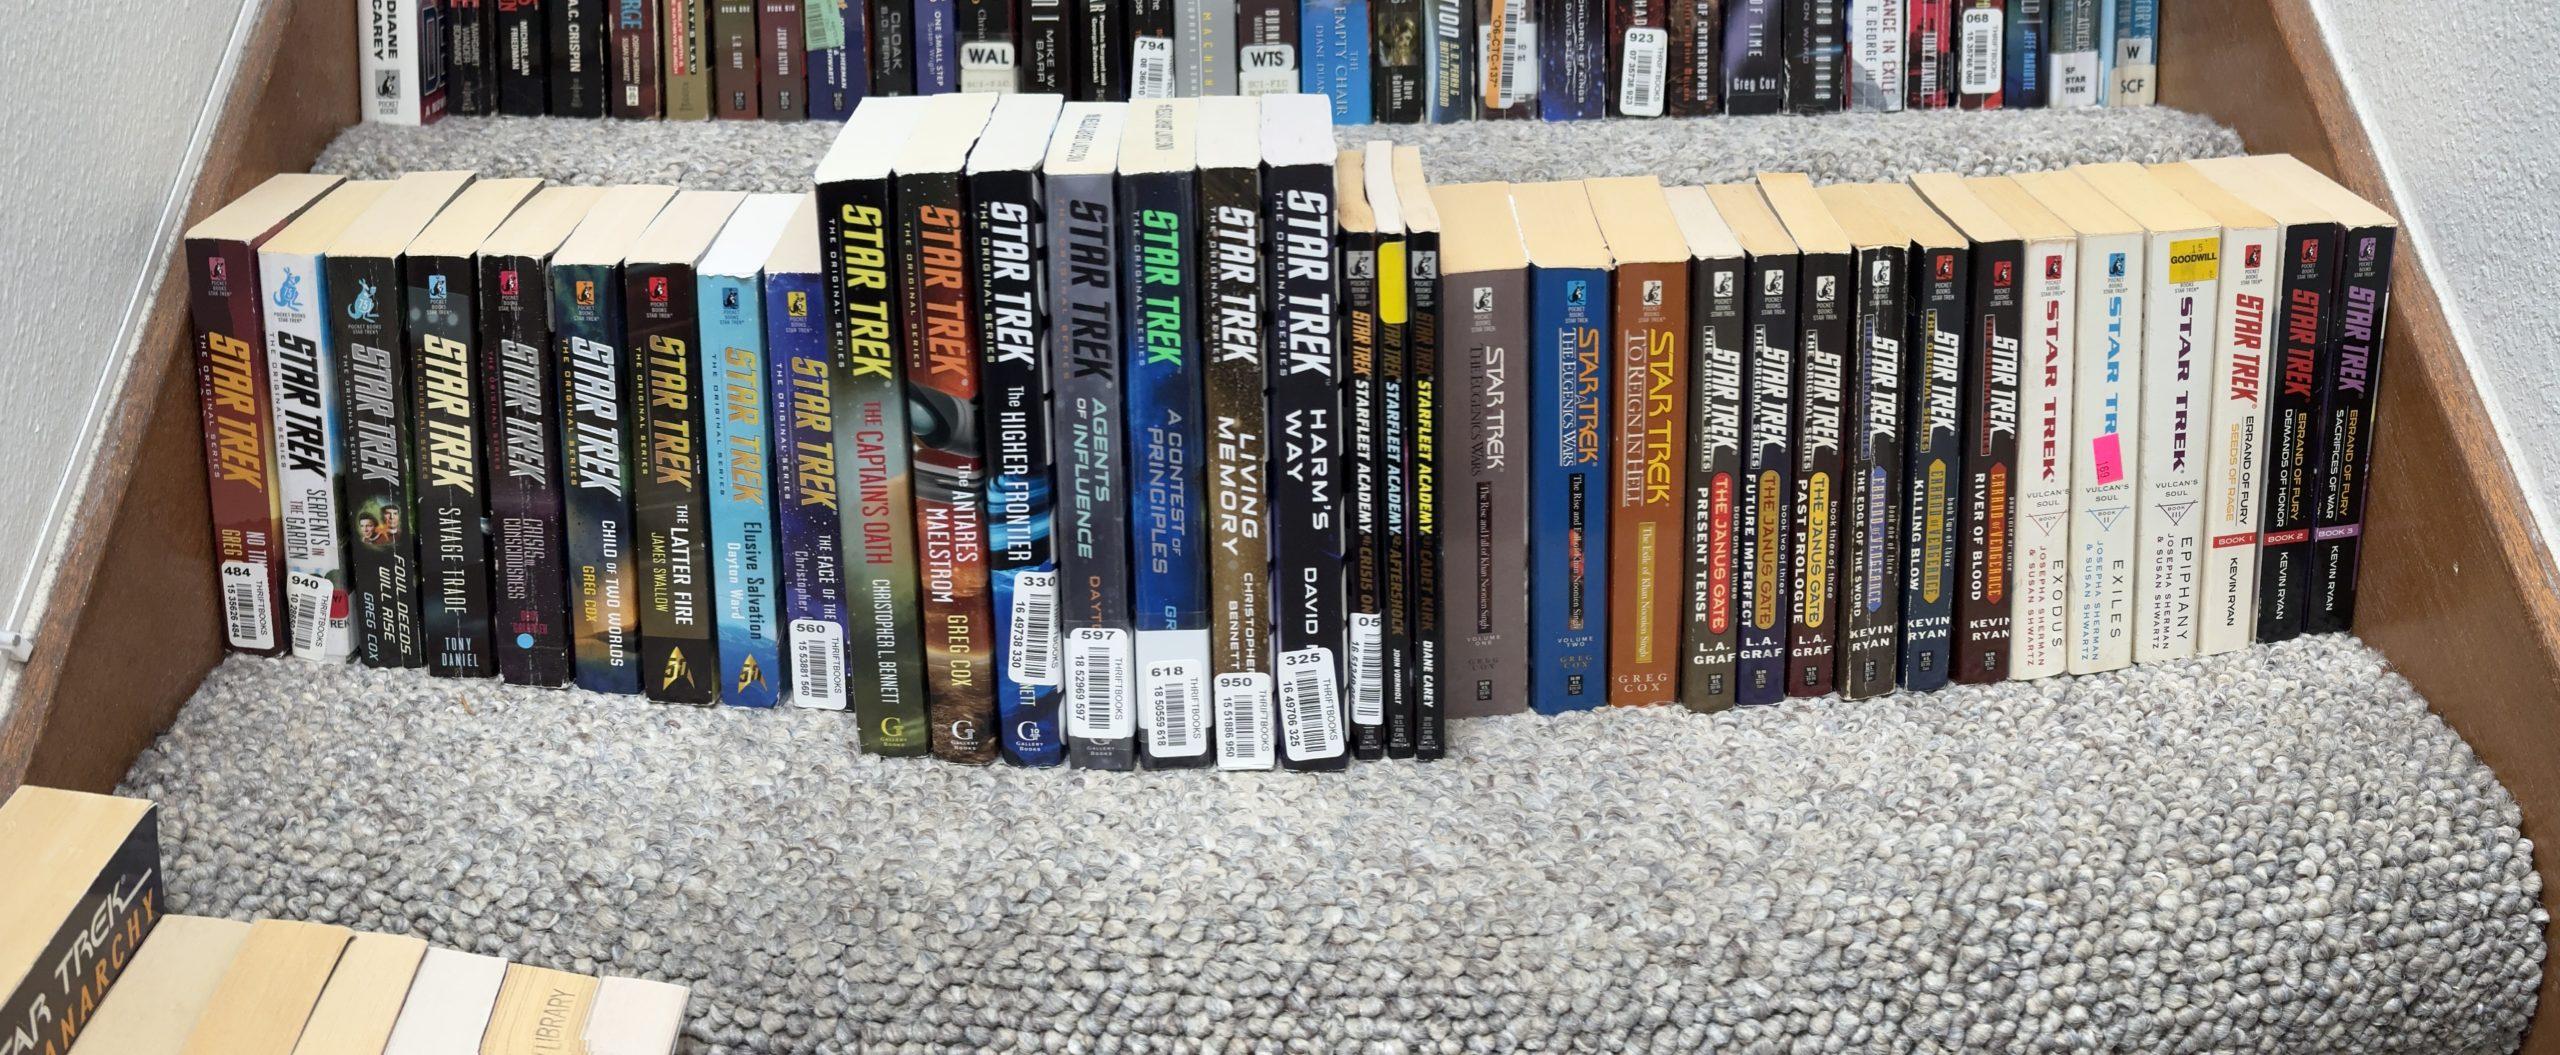 Panoramic shot of about 30 Star Trek novels across a staircase step.